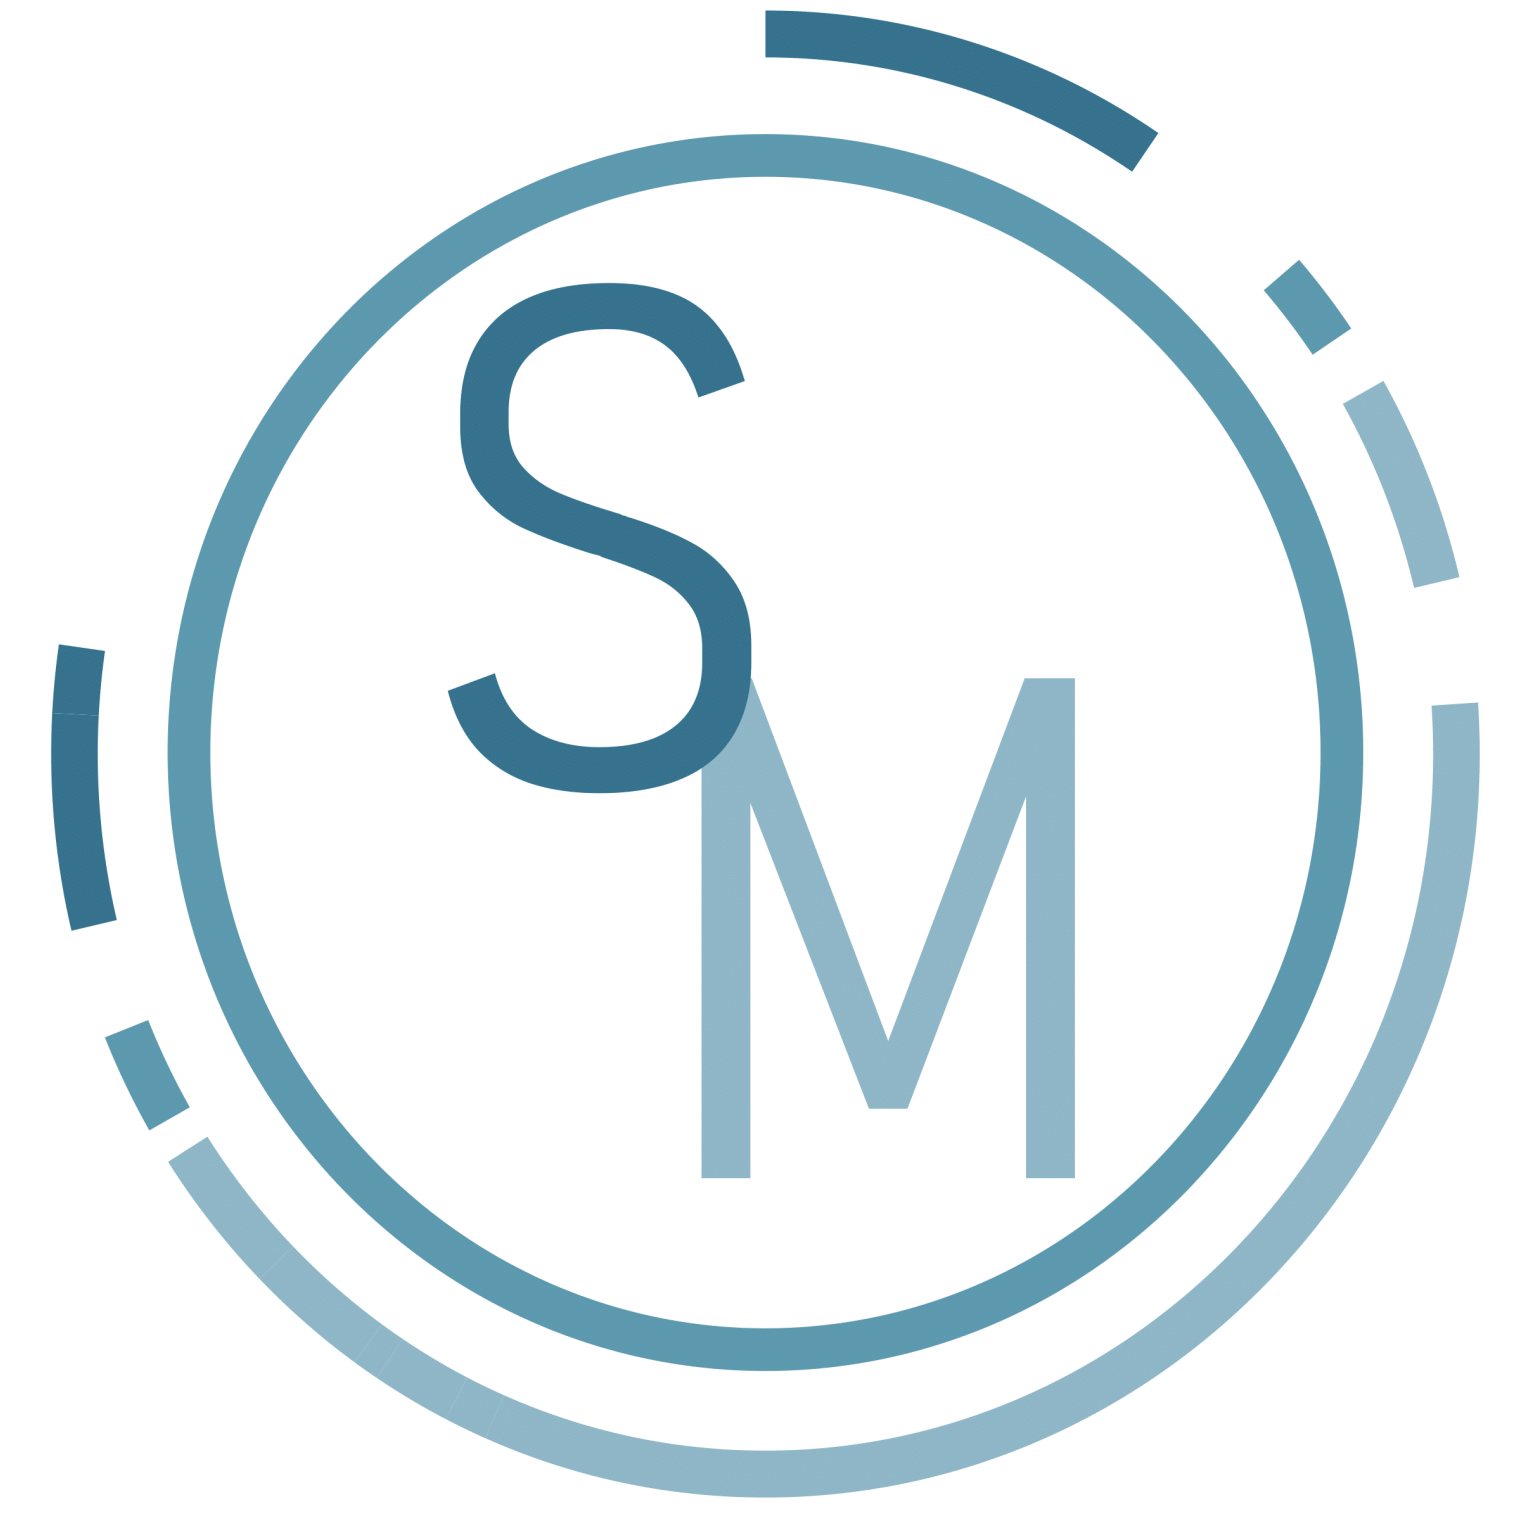 A logo with the letter s and m in a circle.